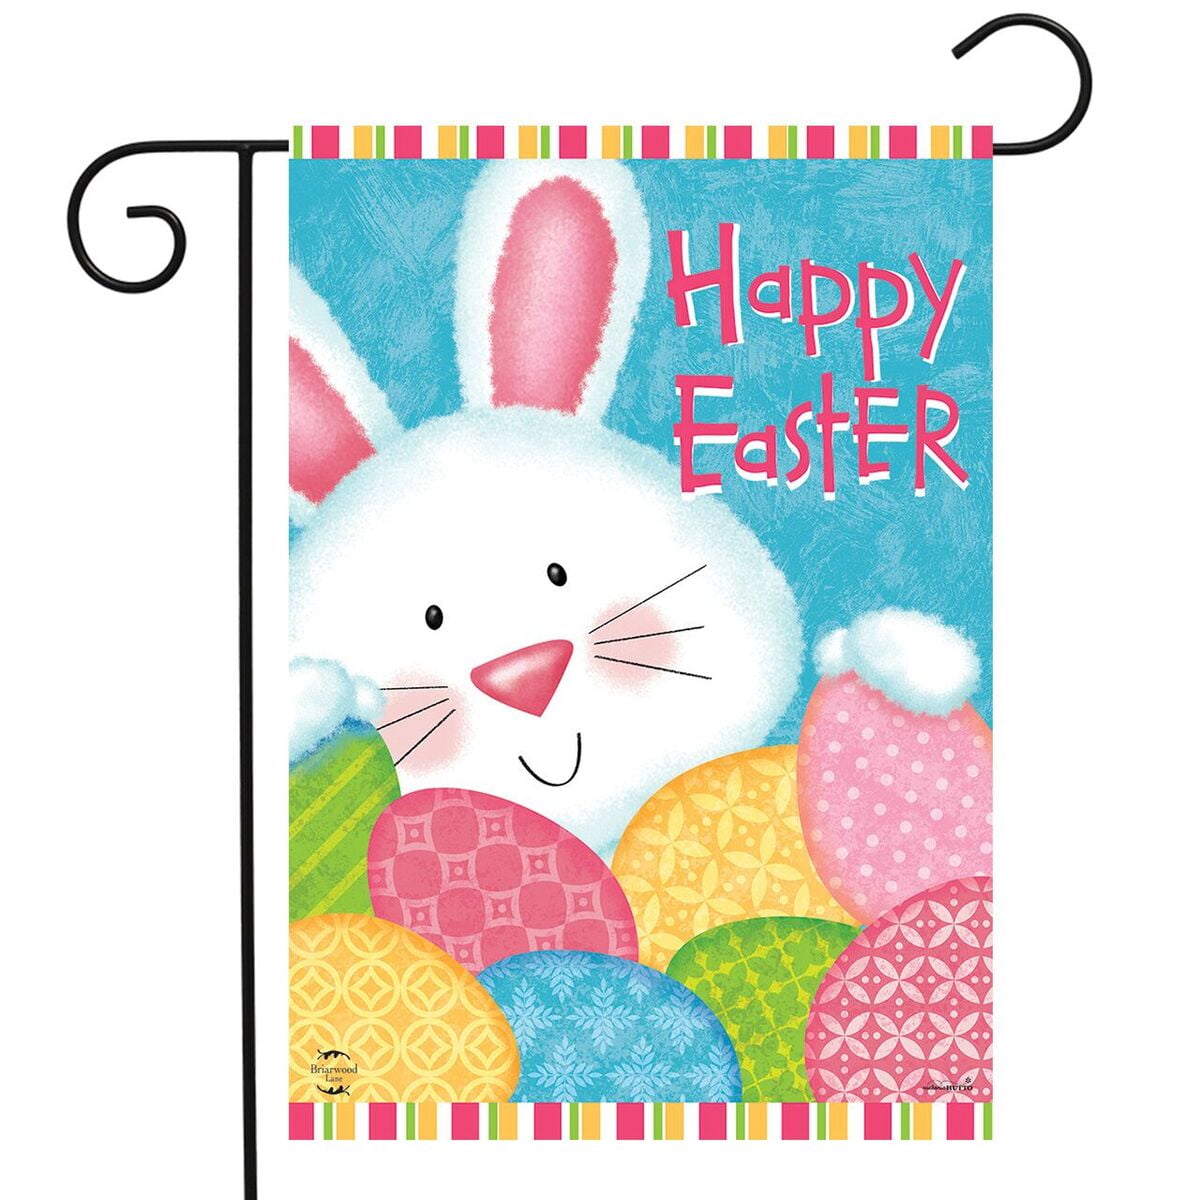 Dtzzou Happy Easter Bunny Garden Flag 12.5 x 18 Outdoor & Indoor Decorative Cute Rabbit Double Sided Flag for Spring Easter Decoration